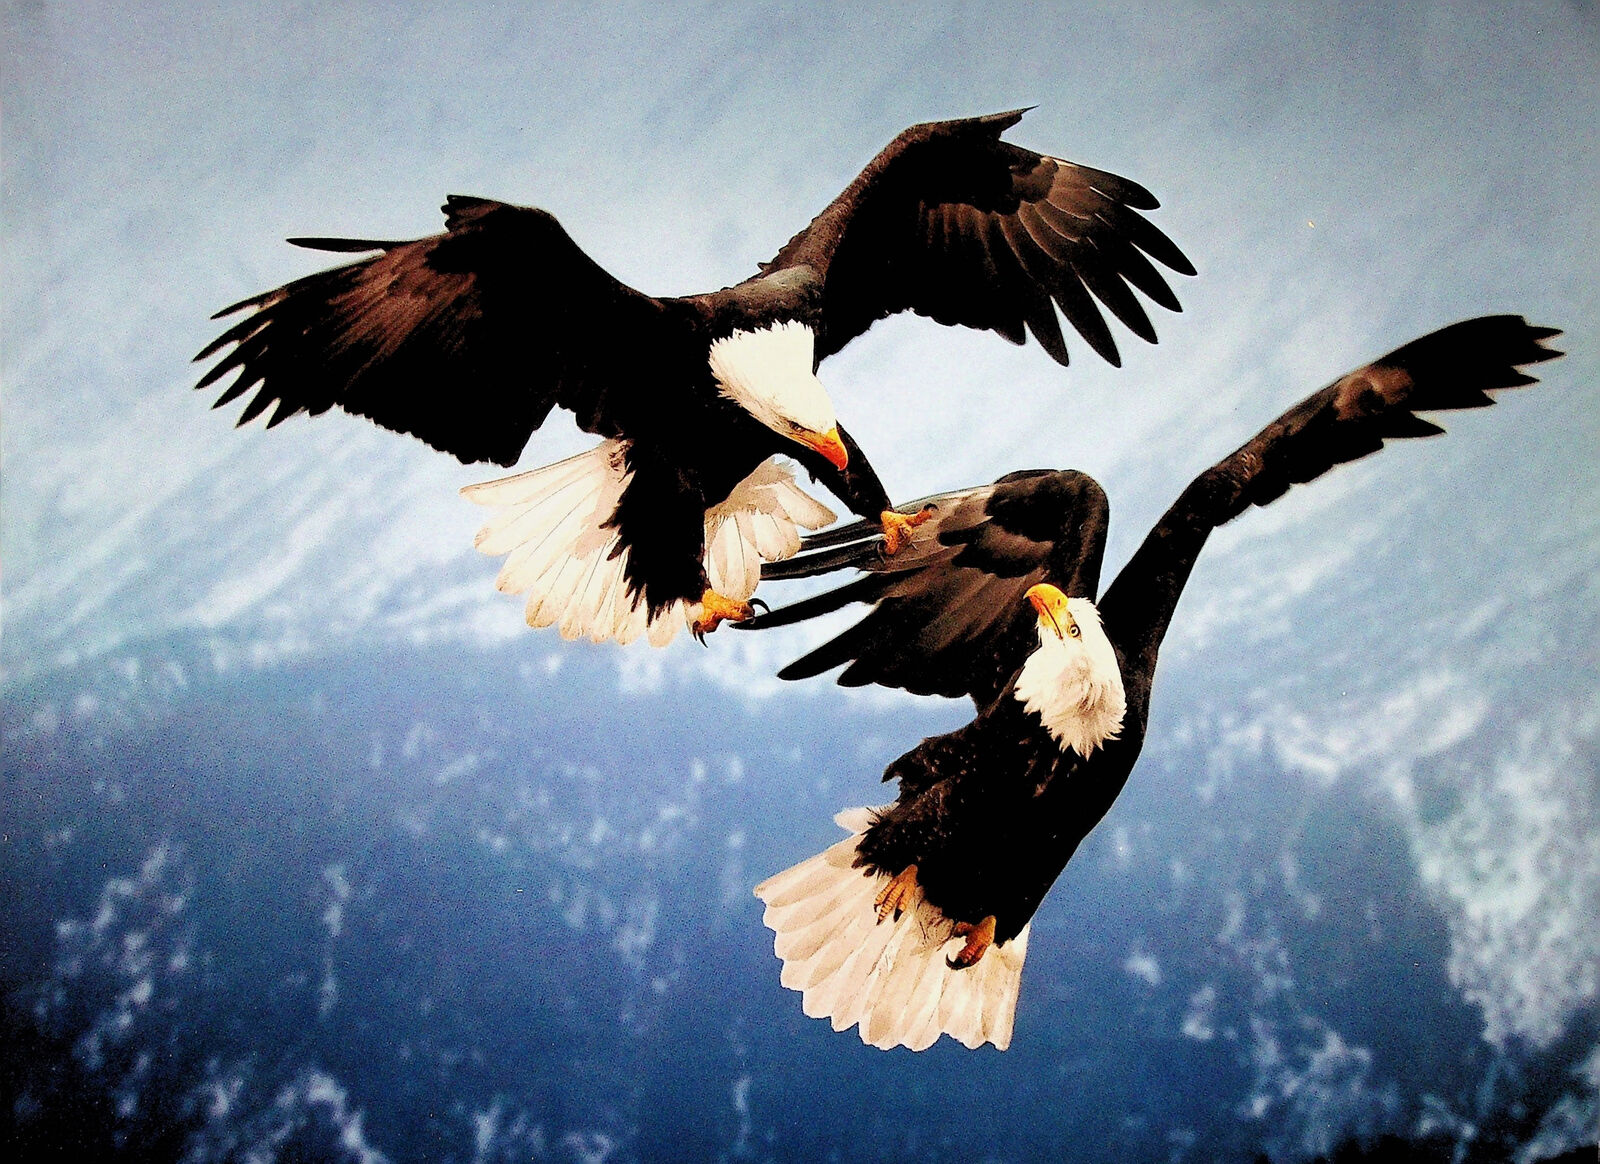 Bald Eagle Arial Fight - Wild Animal Poster 9